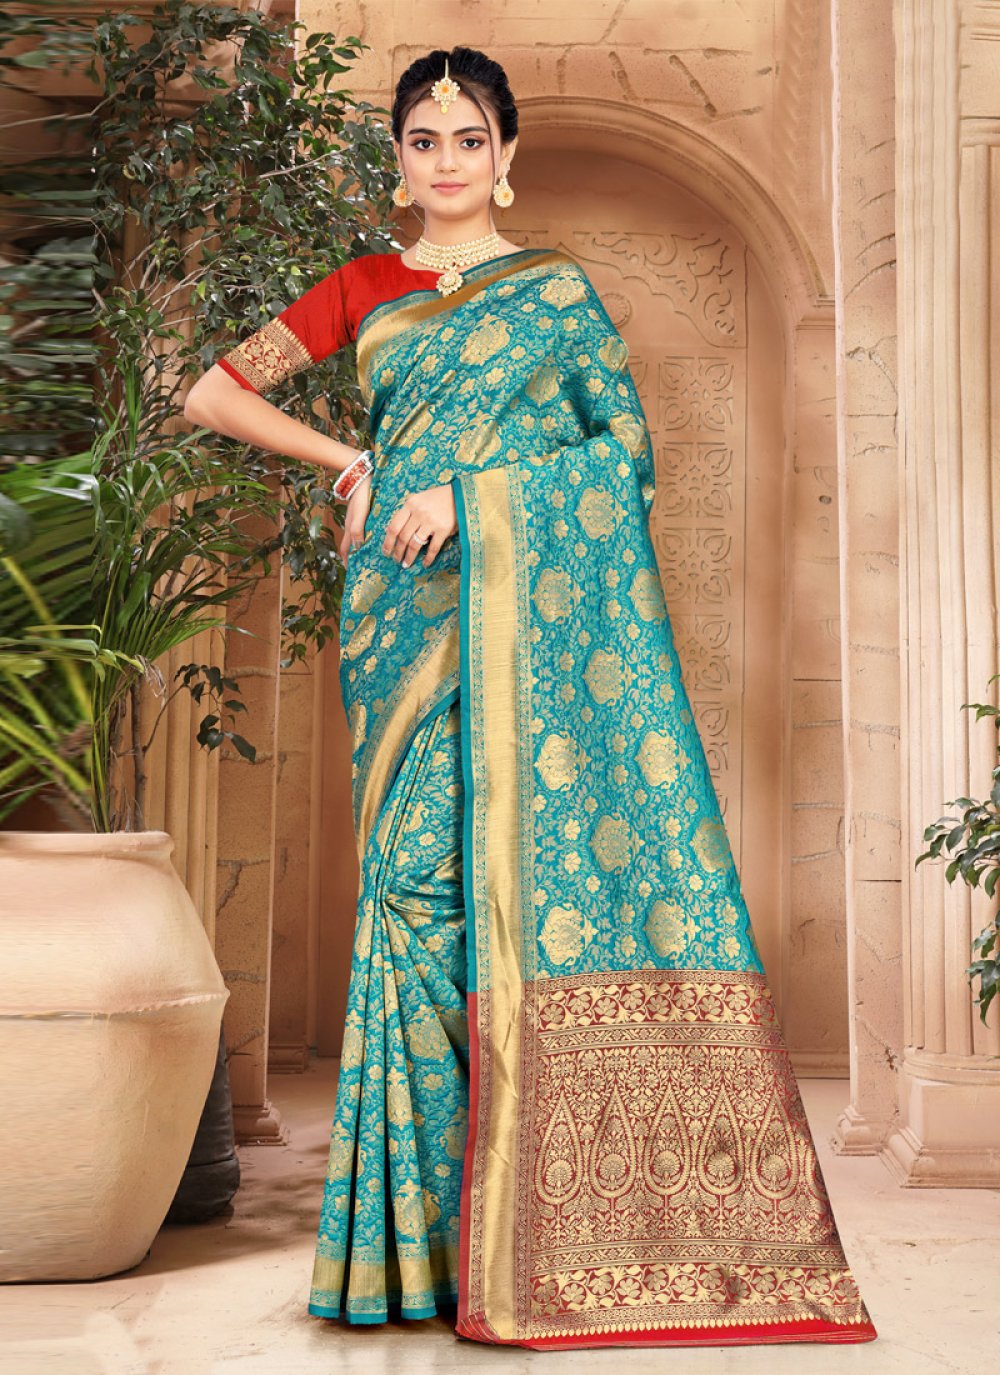 Red and Teal Woven Work Contemporary Style Saree